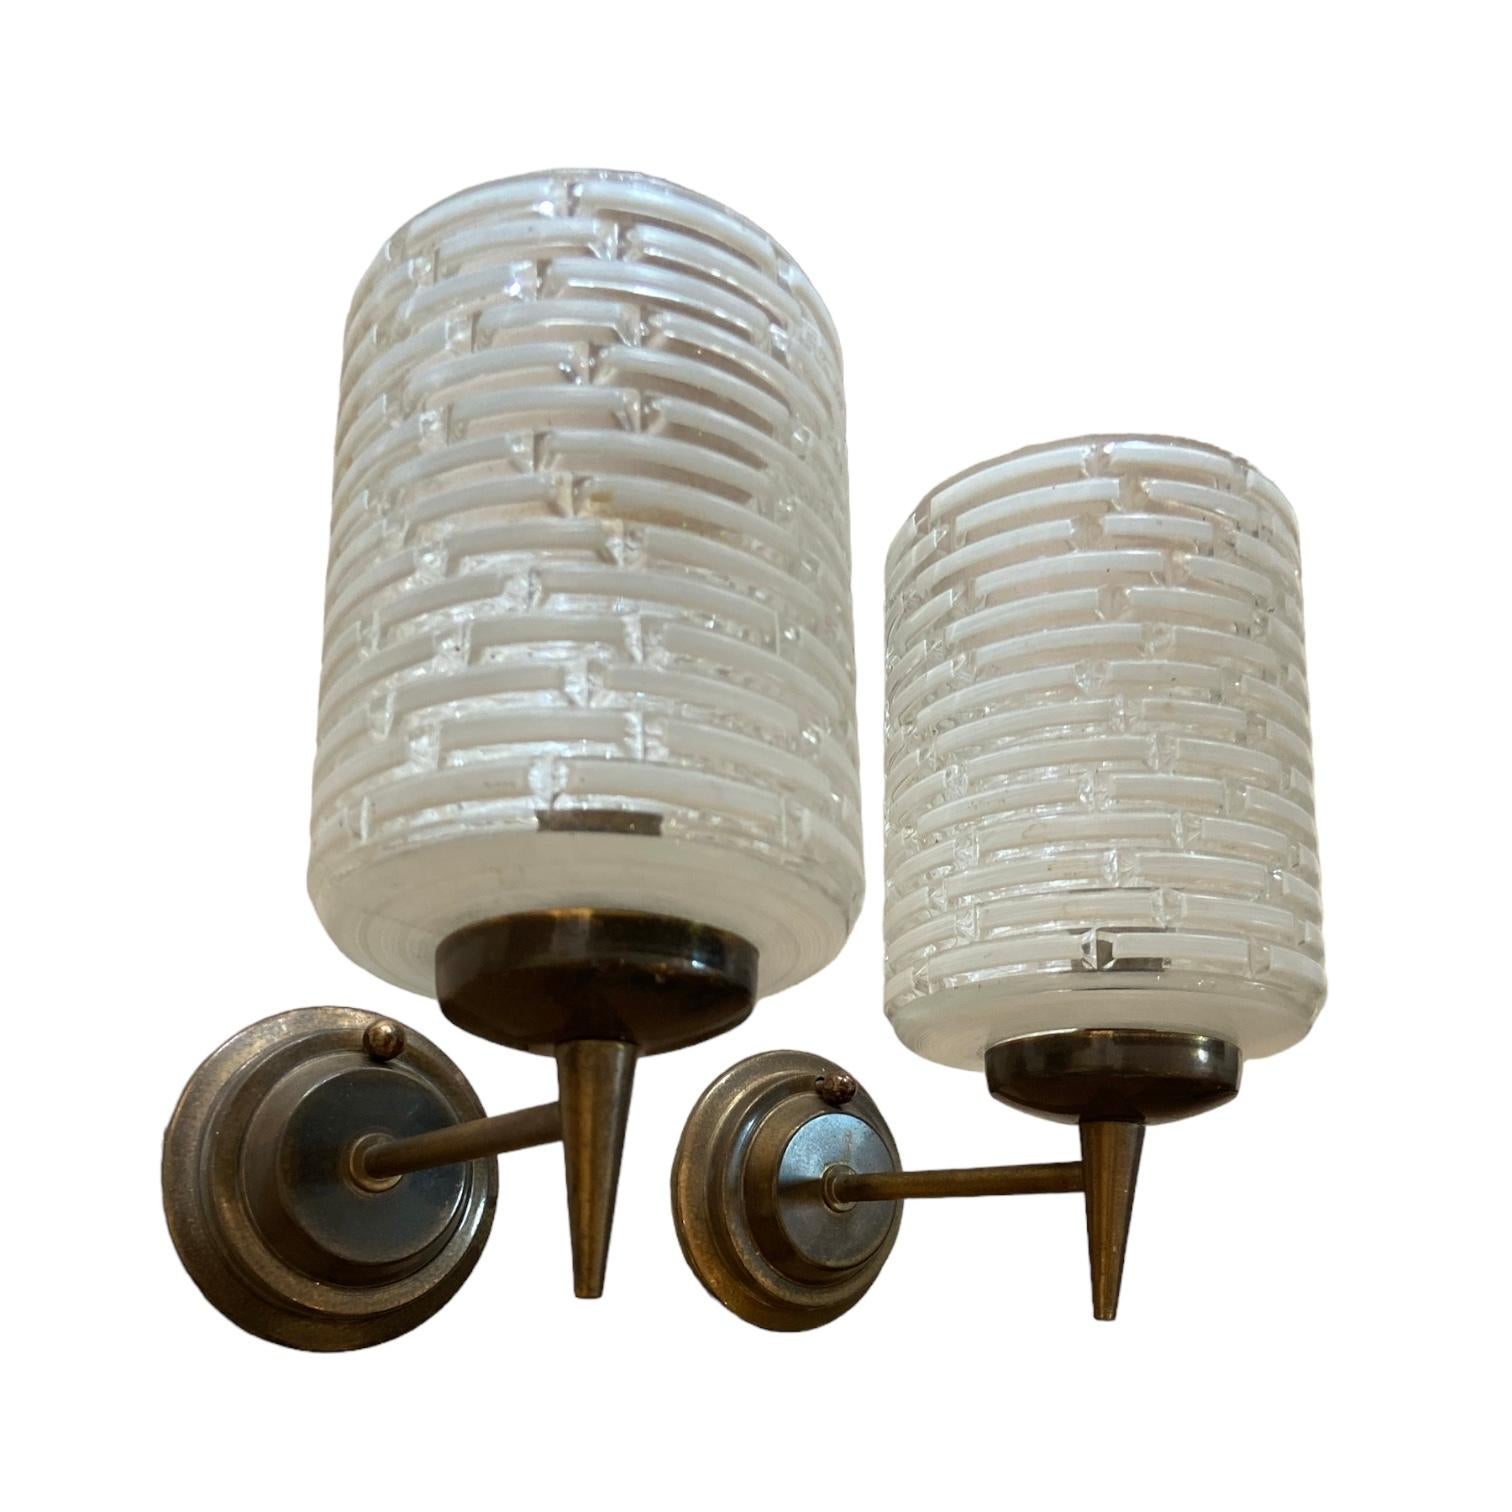 Pair of Italian Wall lights in bronze and glass shades.
Italy, circa 1950. H: 25cm. W: 9cm. D: 13cm.